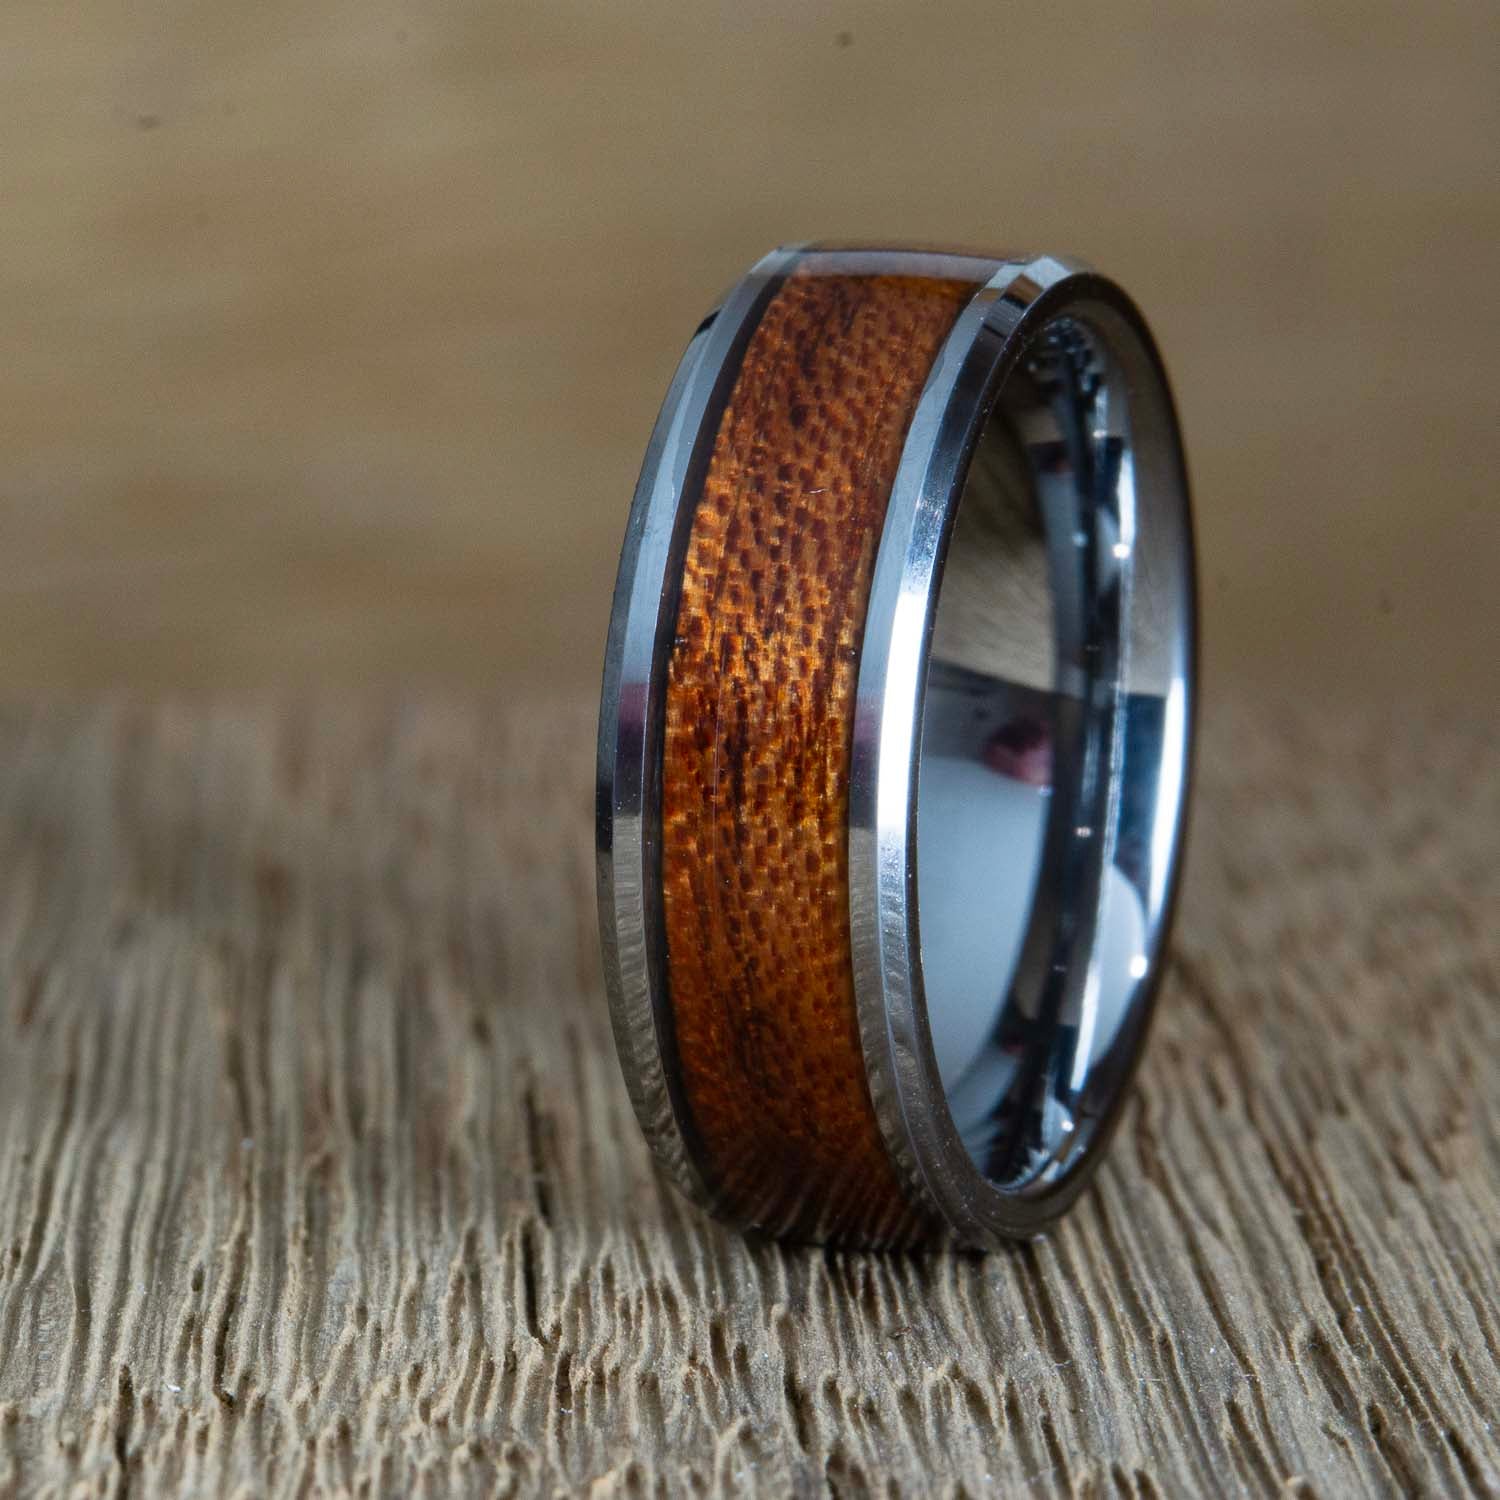 "The Woodsman" wide inlay Tungsten ring with Acacia wood inlay